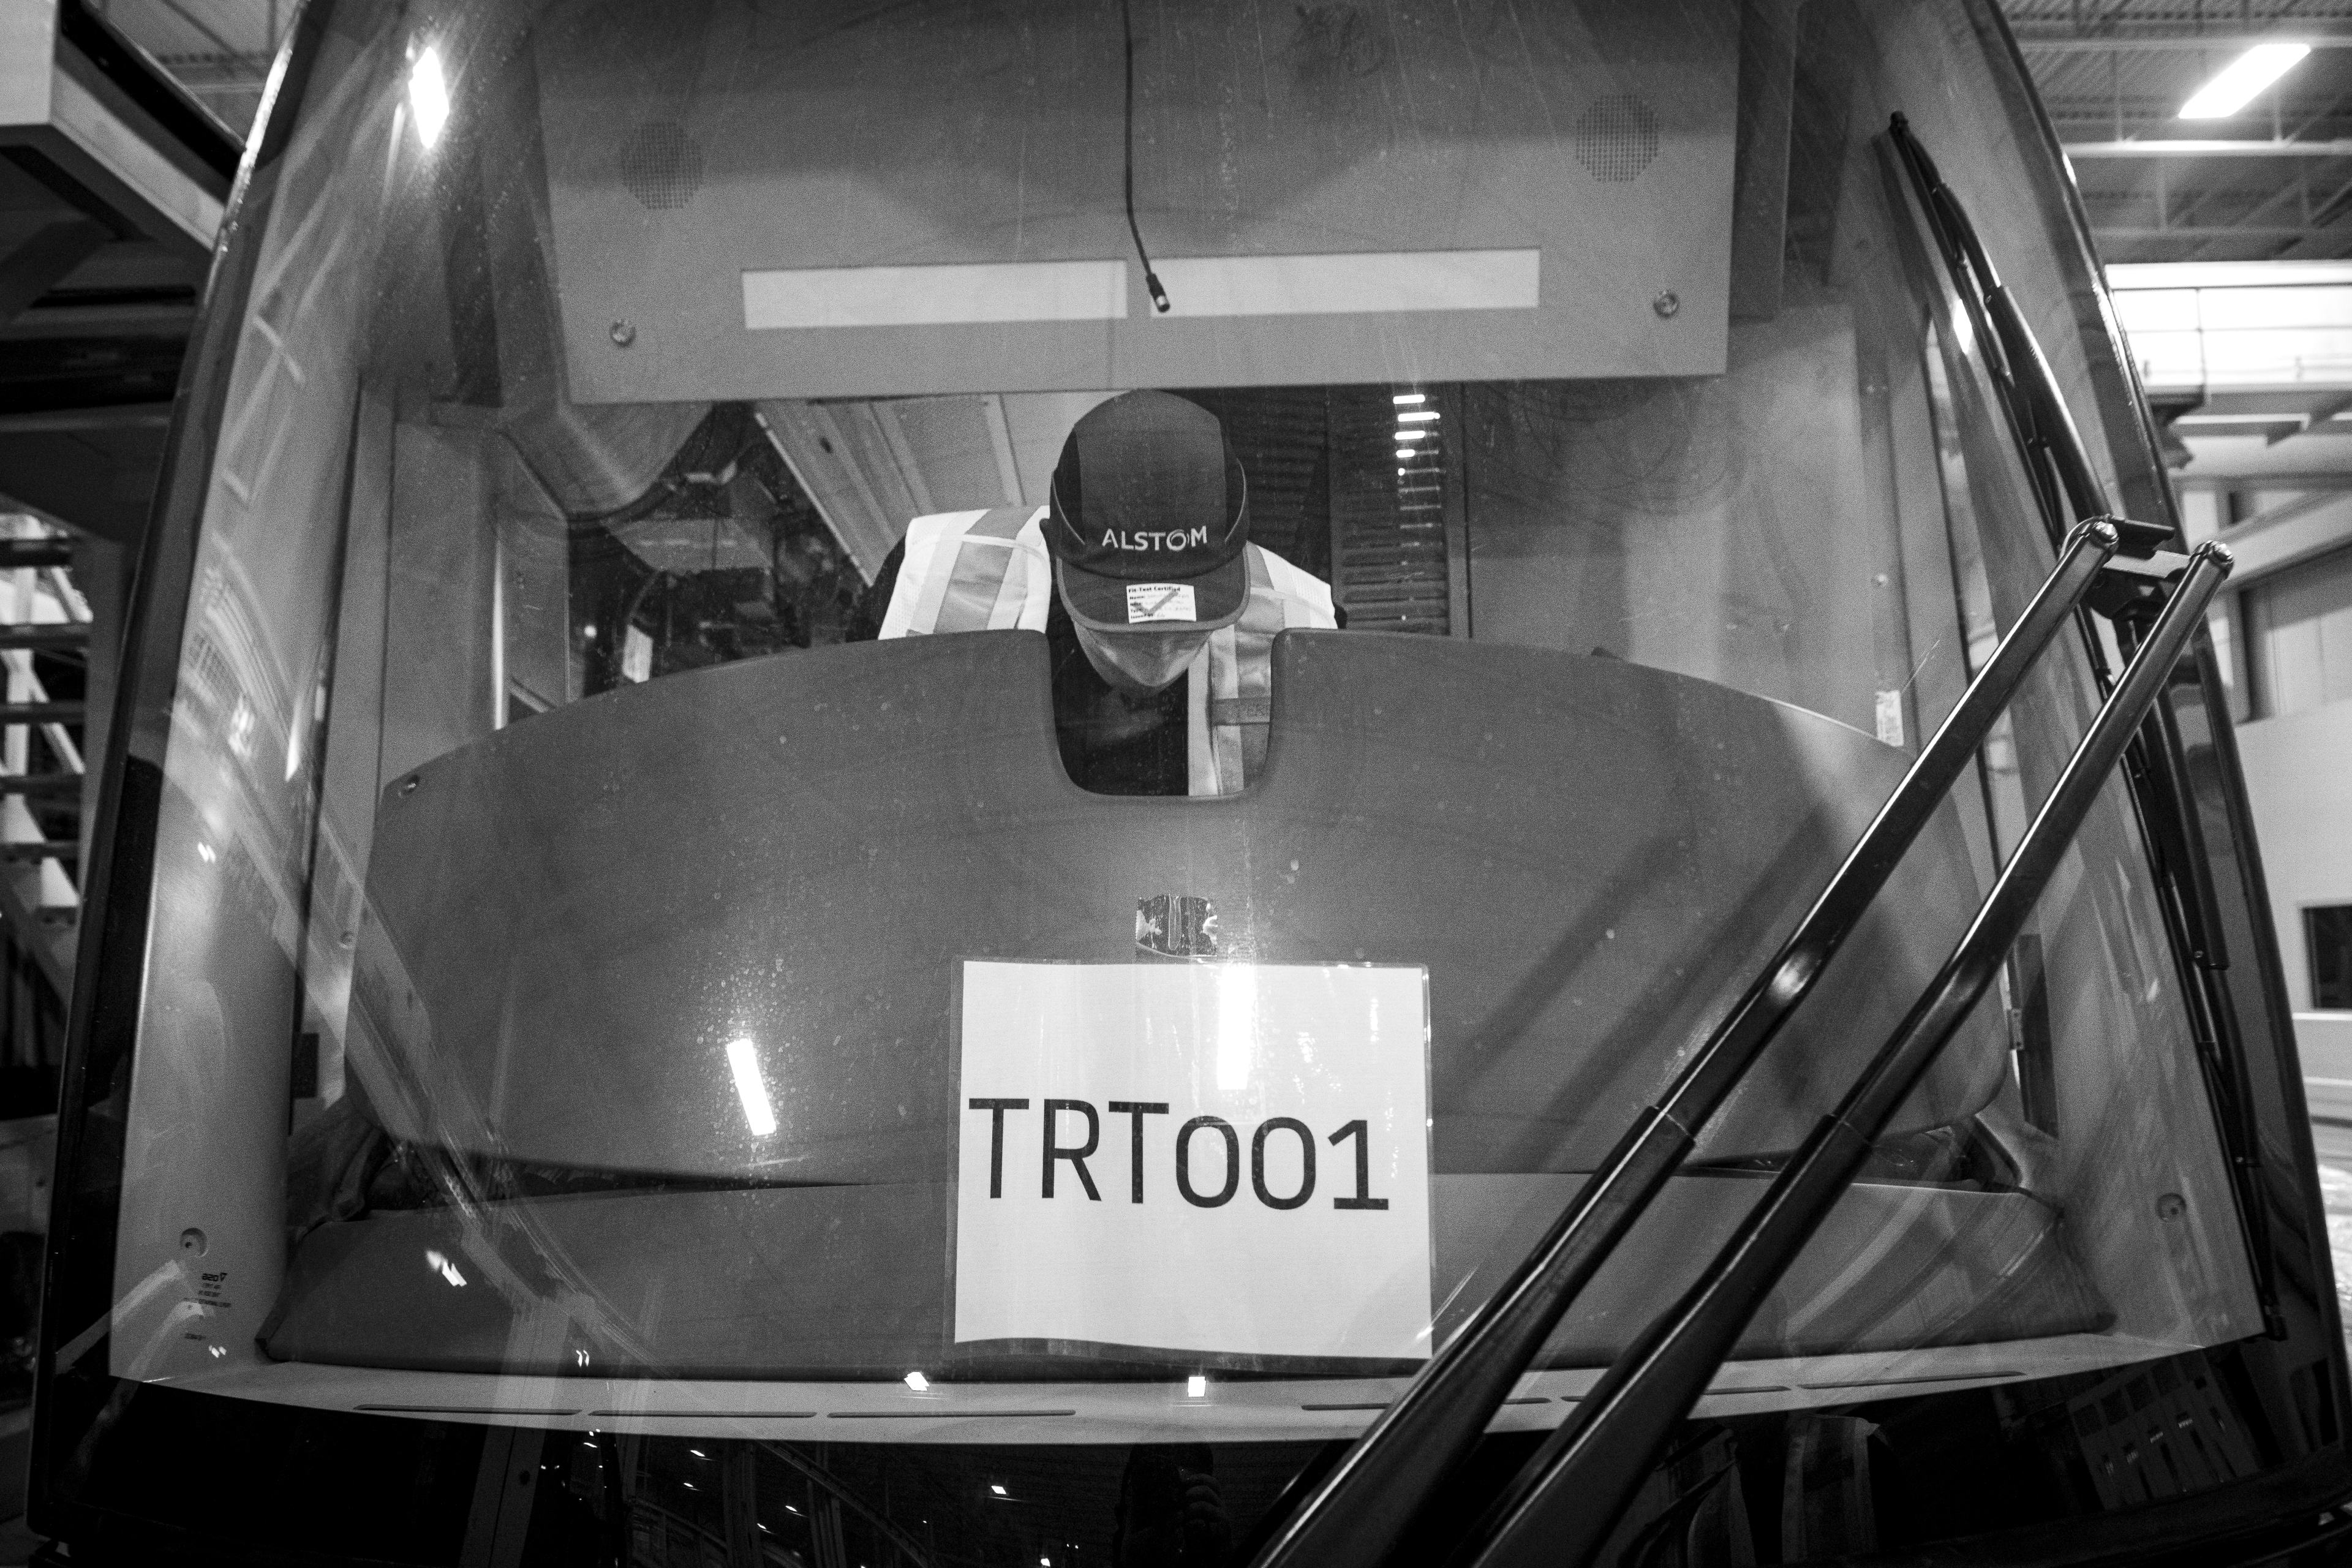 A man is seen working behind the windshield of a transit vehicle.